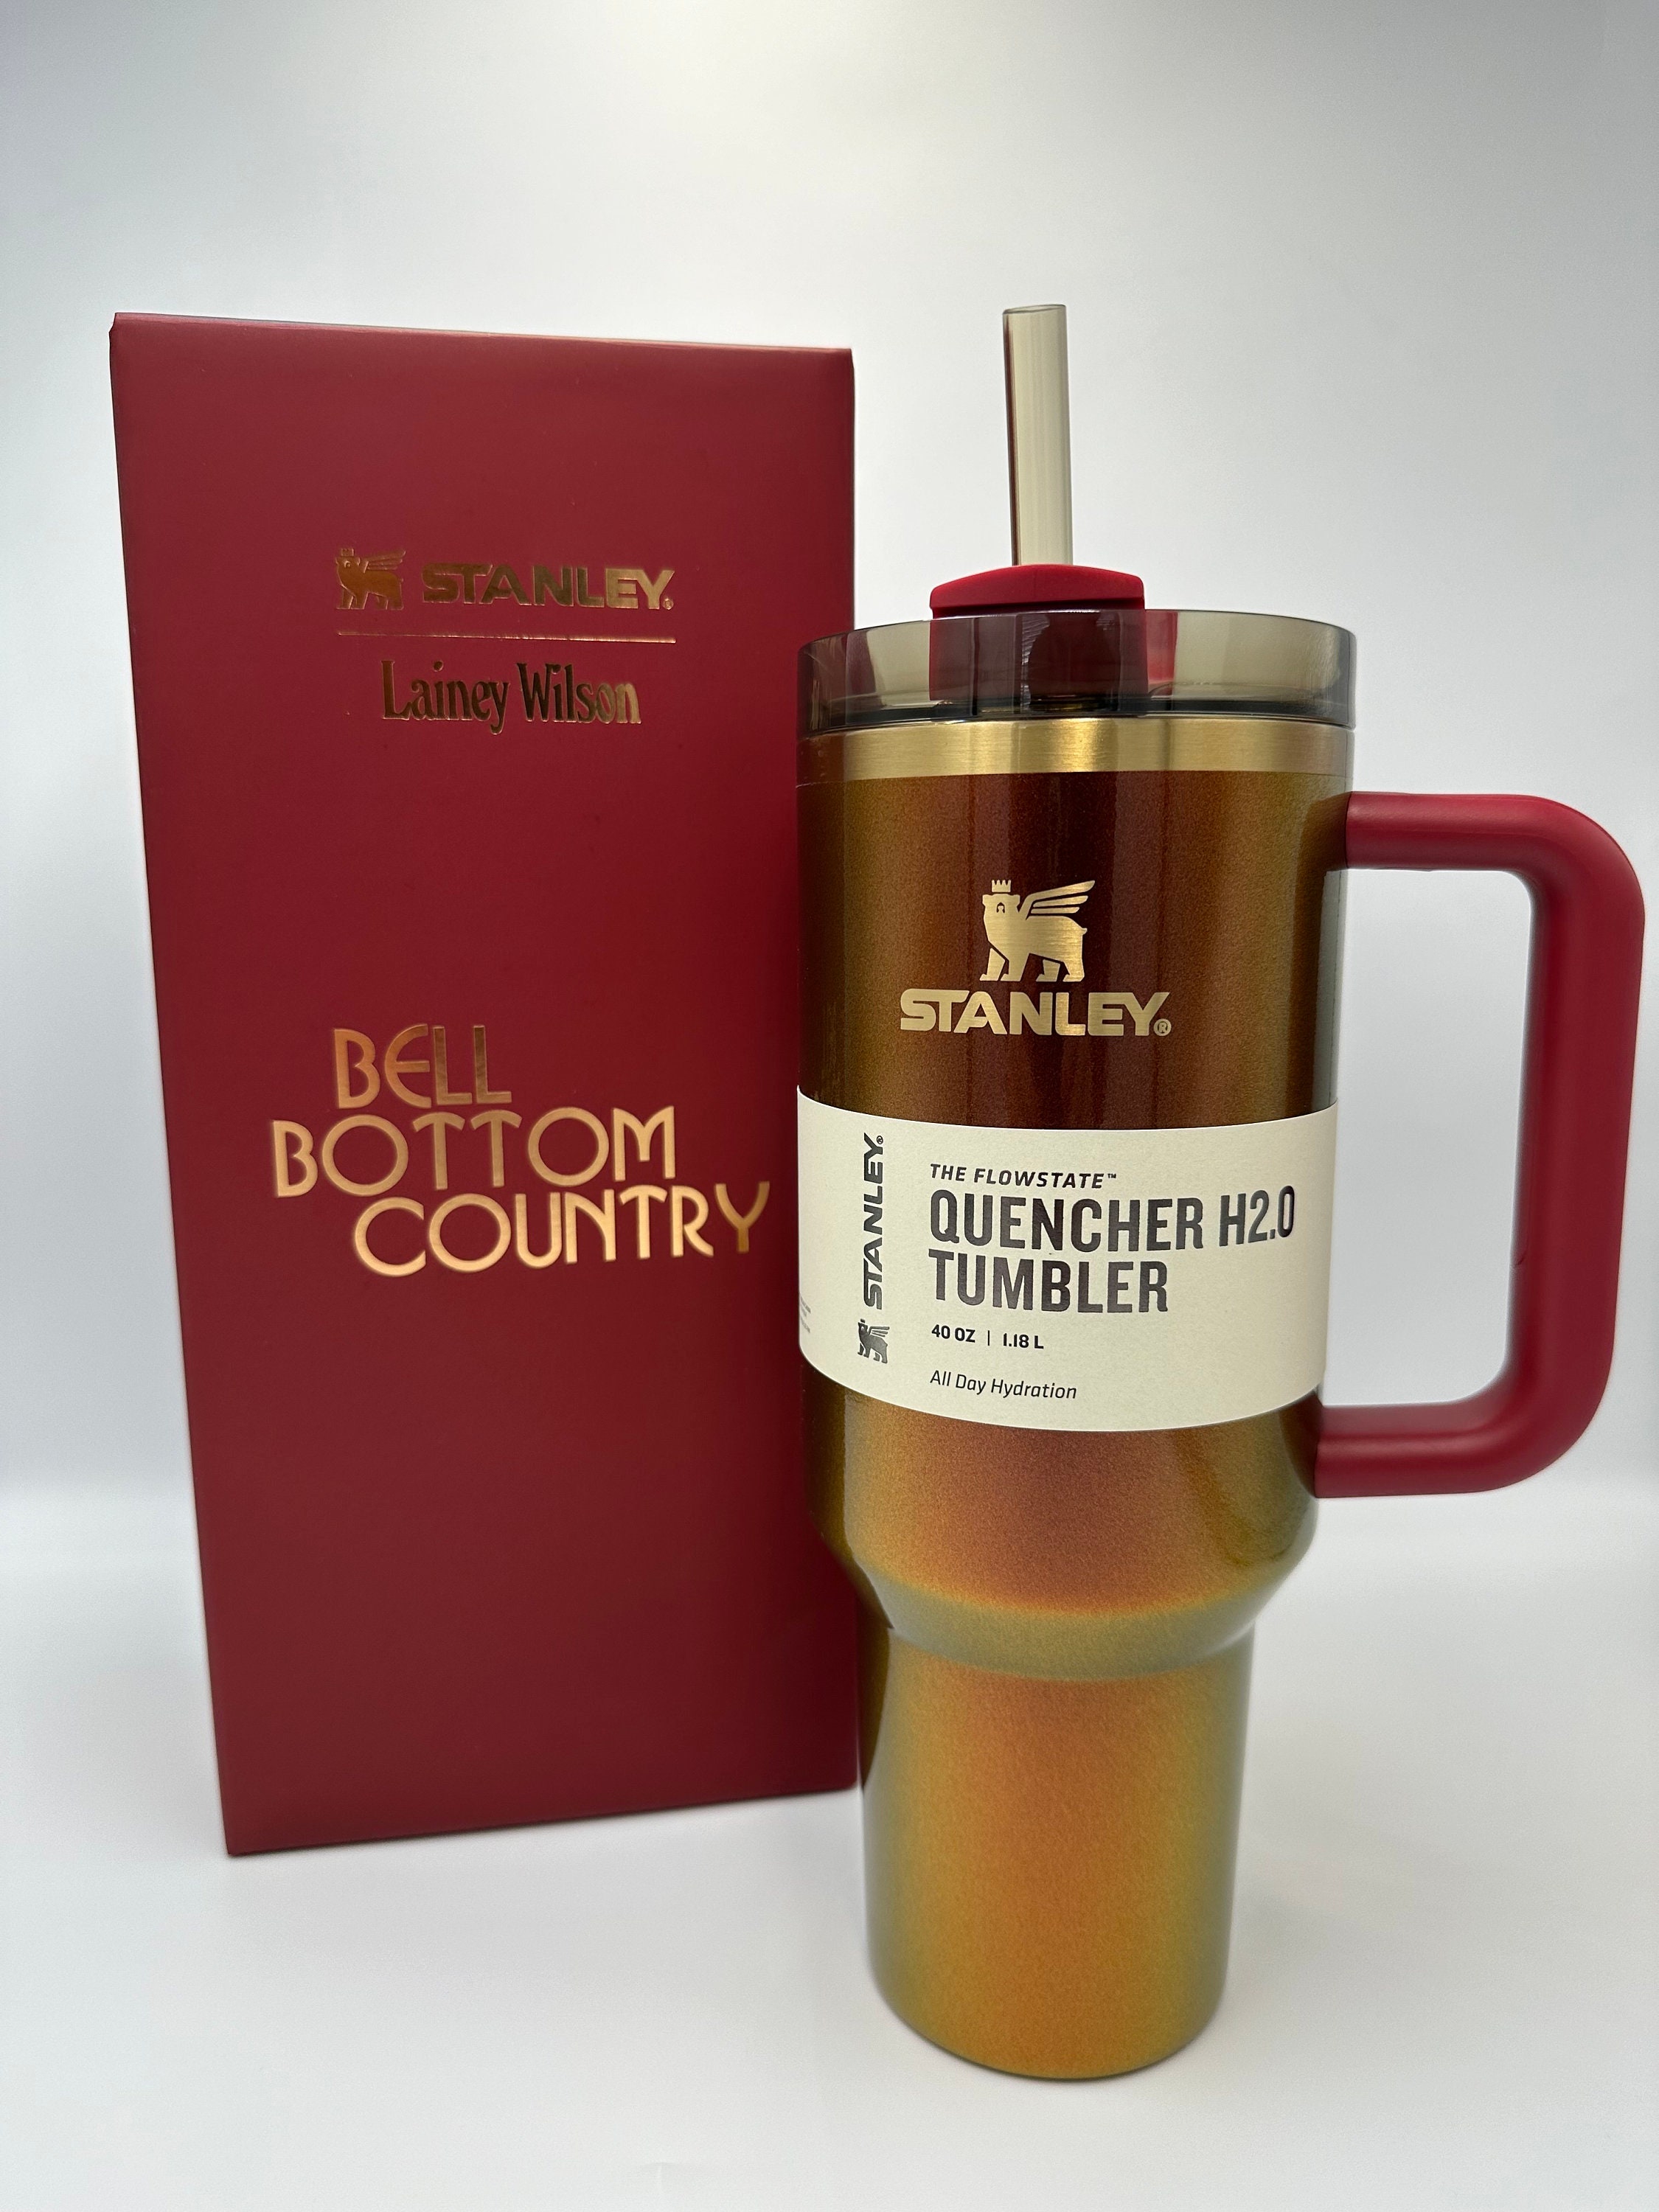 Stanley x Lainey Wilson Quencher H2.0 40 OZ Tumbler Gold Limited Edition 